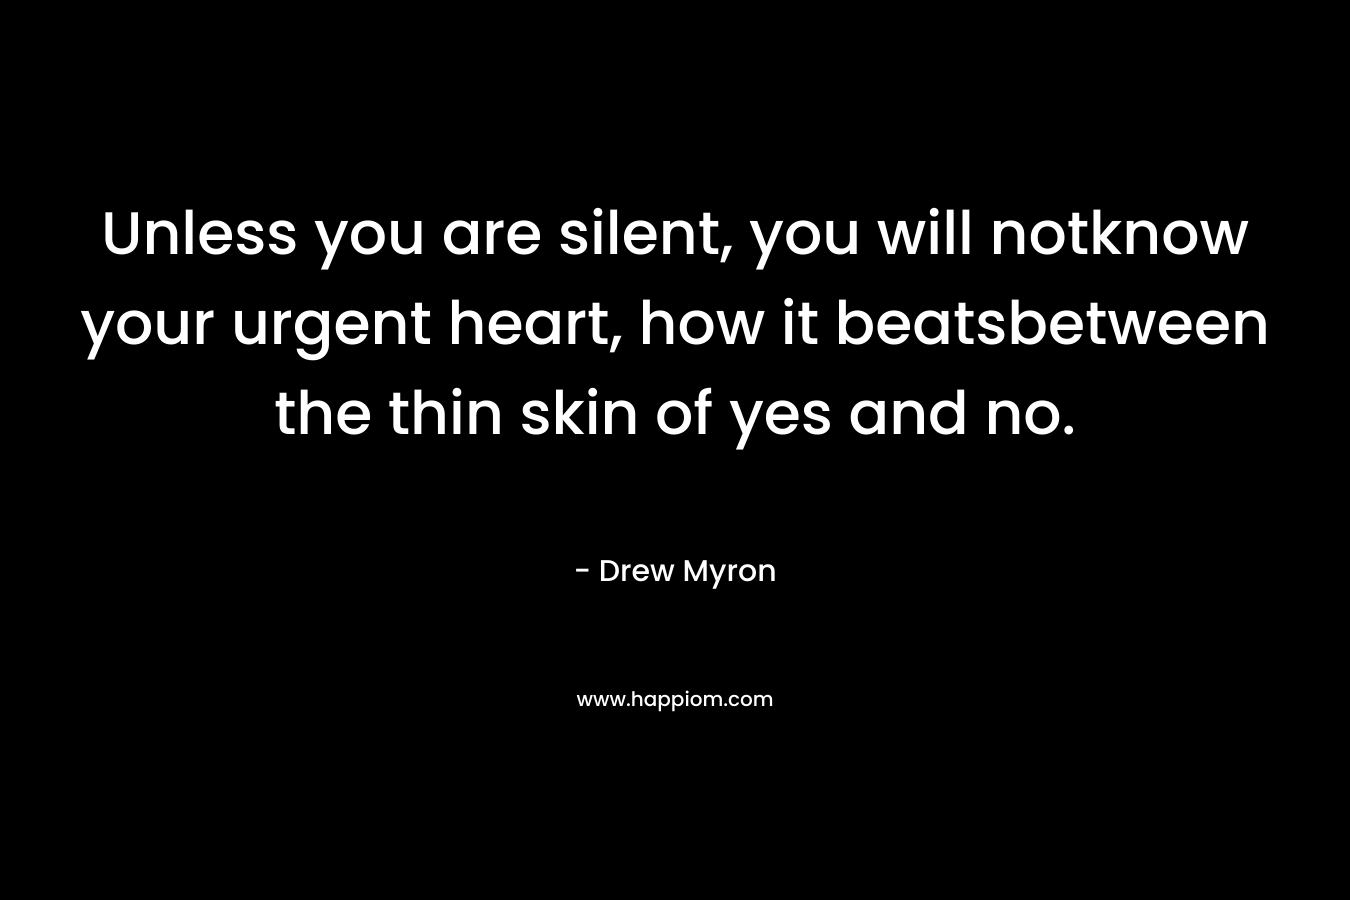 Unless you are silent, you will notknow your urgent heart, how it beatsbetween the thin skin of yes and no.